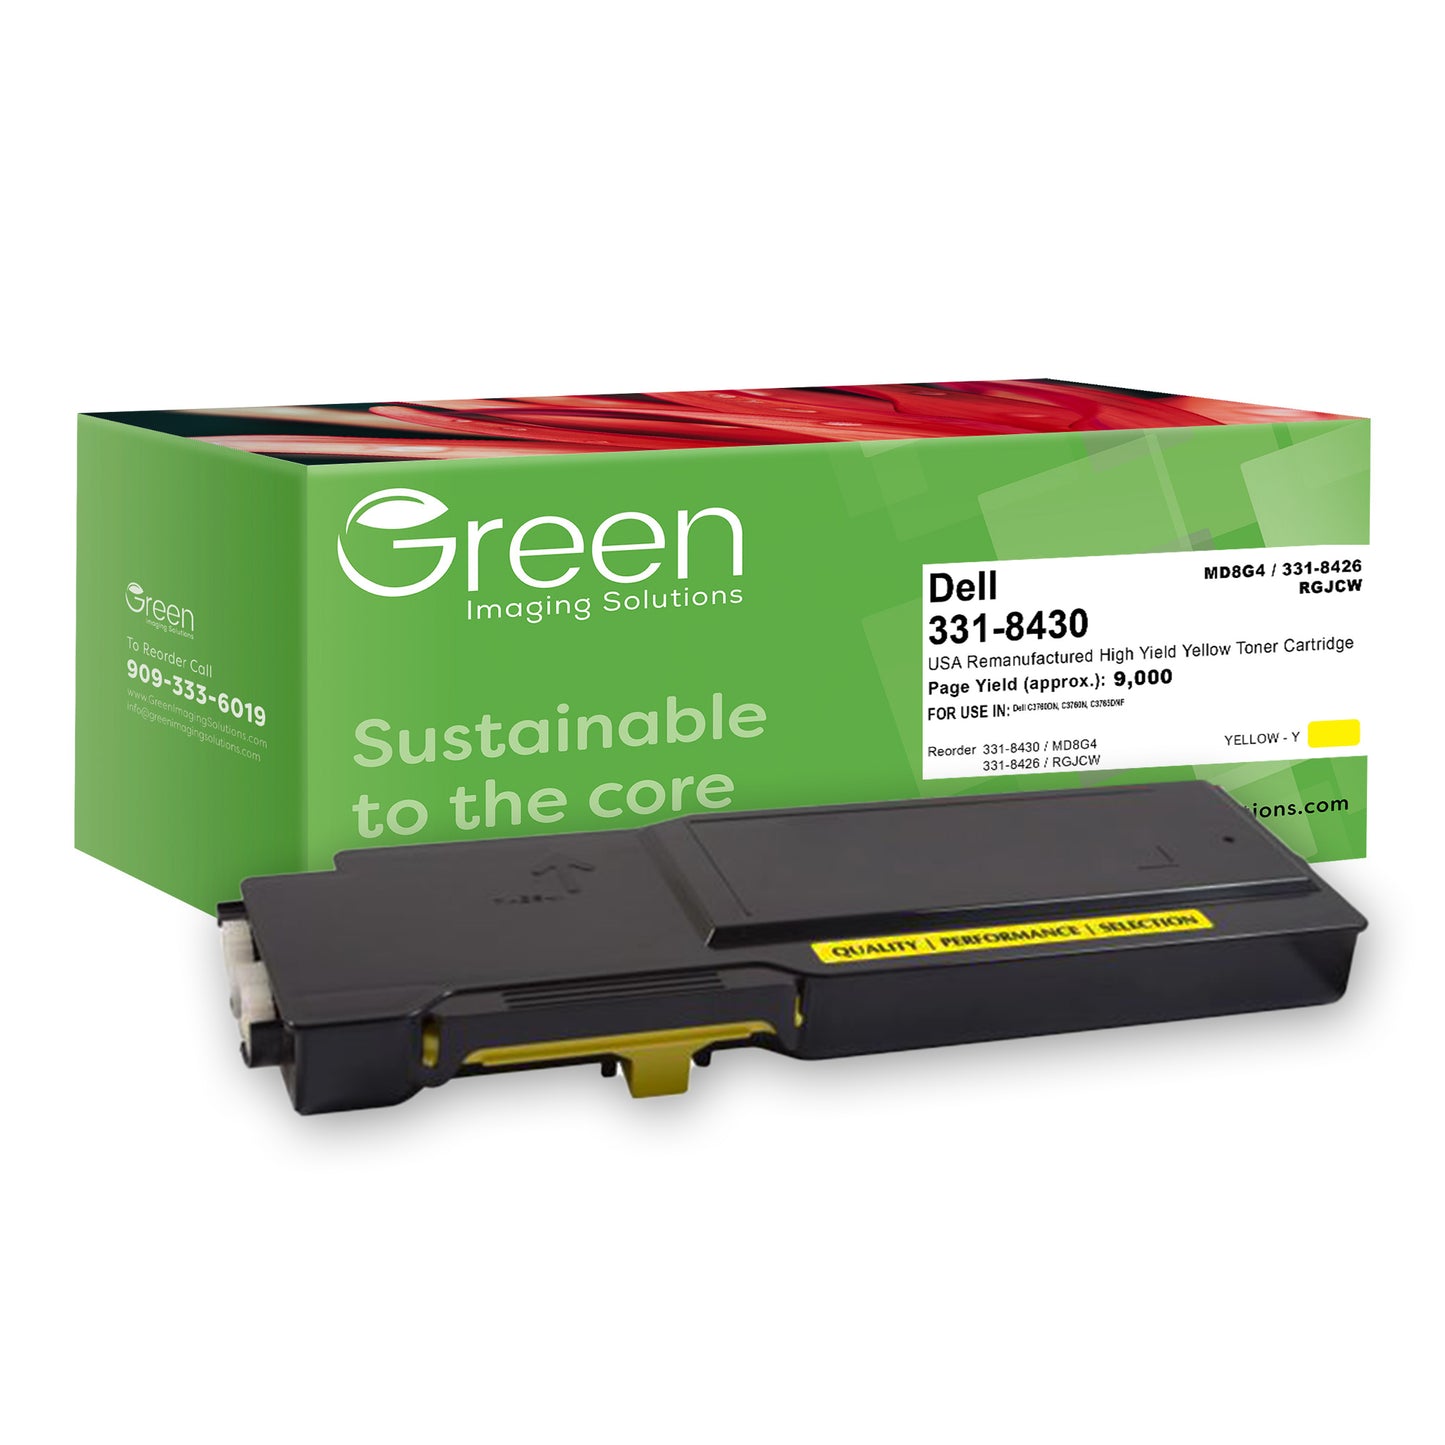 Green Imaging Solutions USA Remanufactured High Yield Yellow Toner Cartridge for Dell C3760